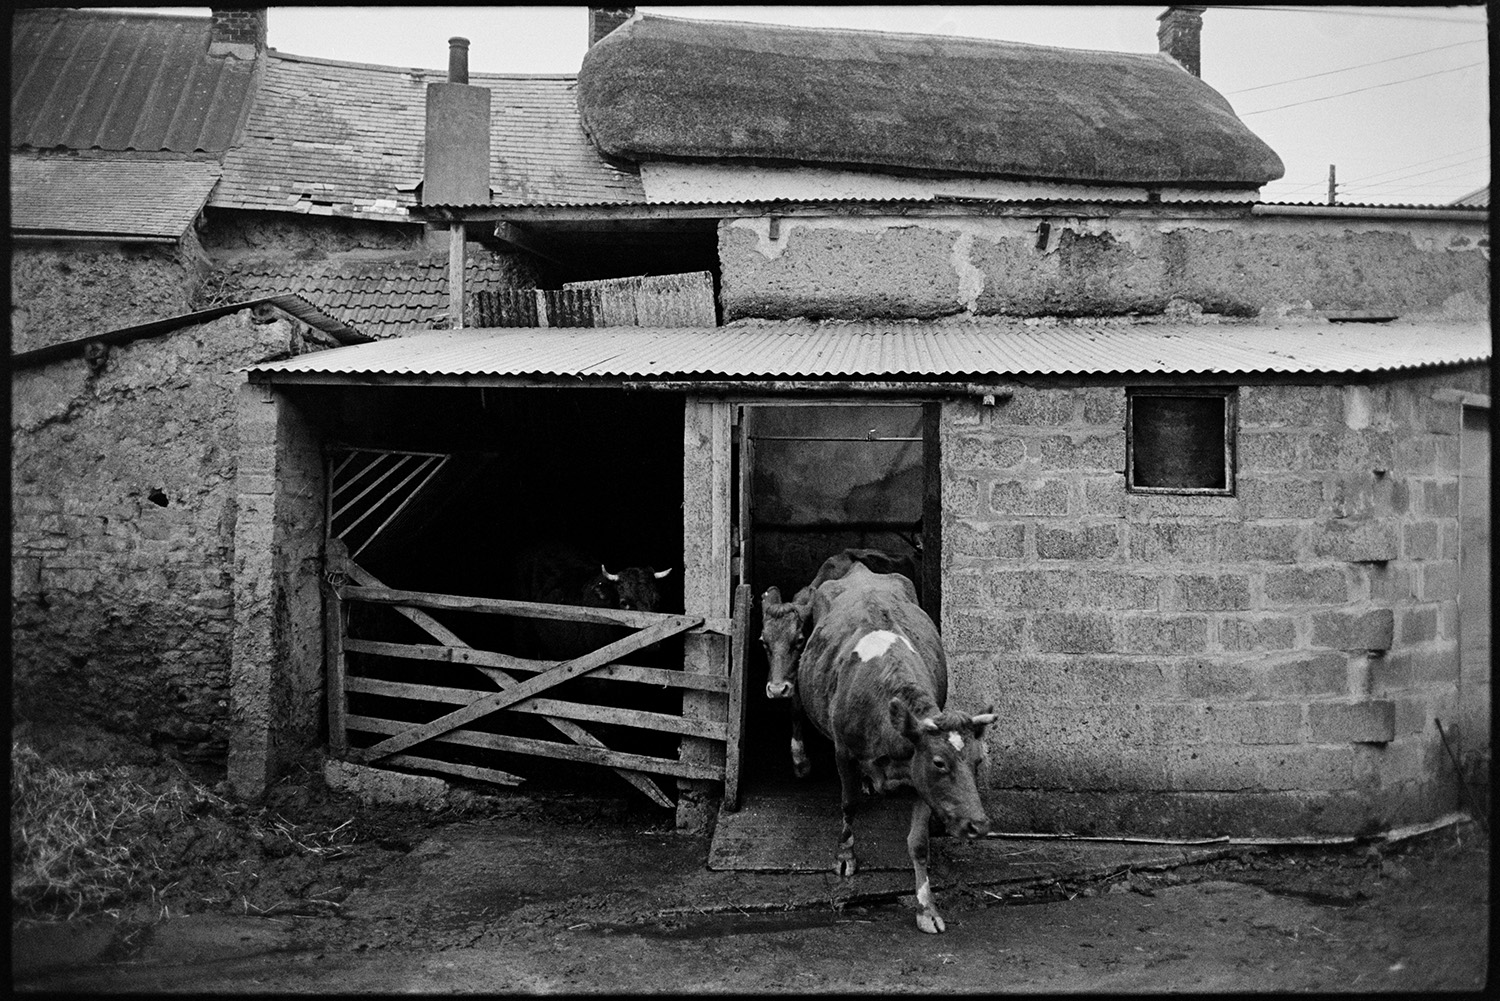 Farmer putting horned cows in barn to be milked. 
[Two cows coming out of a barn with a corrugated iron roof at Verdun, Atherington, going to be milked by Jim Woolacott. A cow is in the barn behind a wooden field gate next to them. The thatched farmhouse can be seen in the background.]